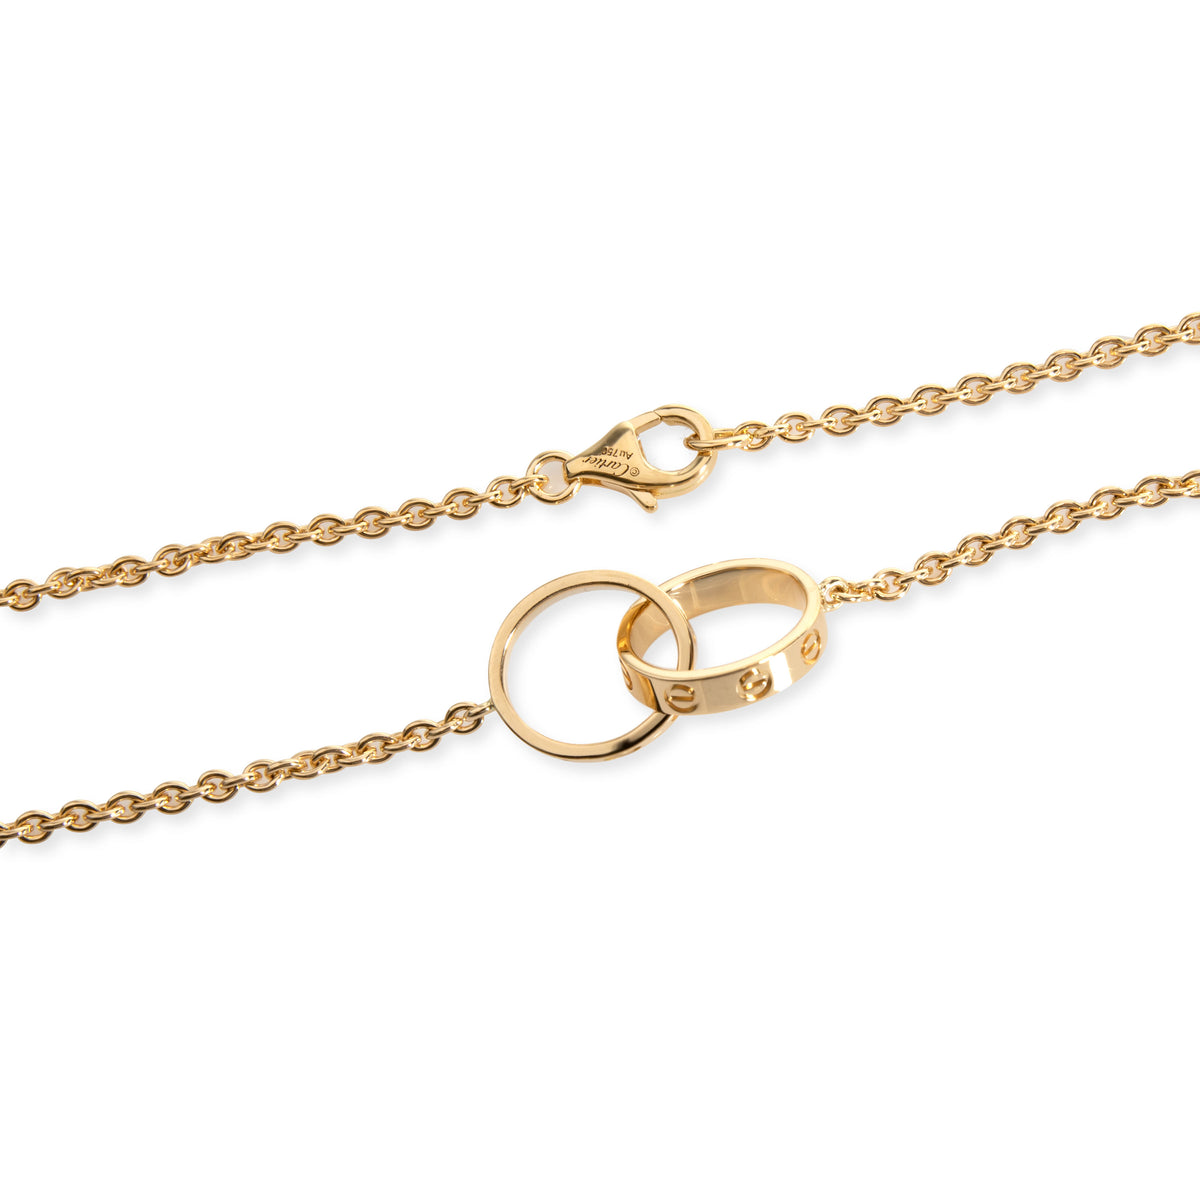 Cartier Love Interlocking Circles Necklace in 18K Yellow Gold